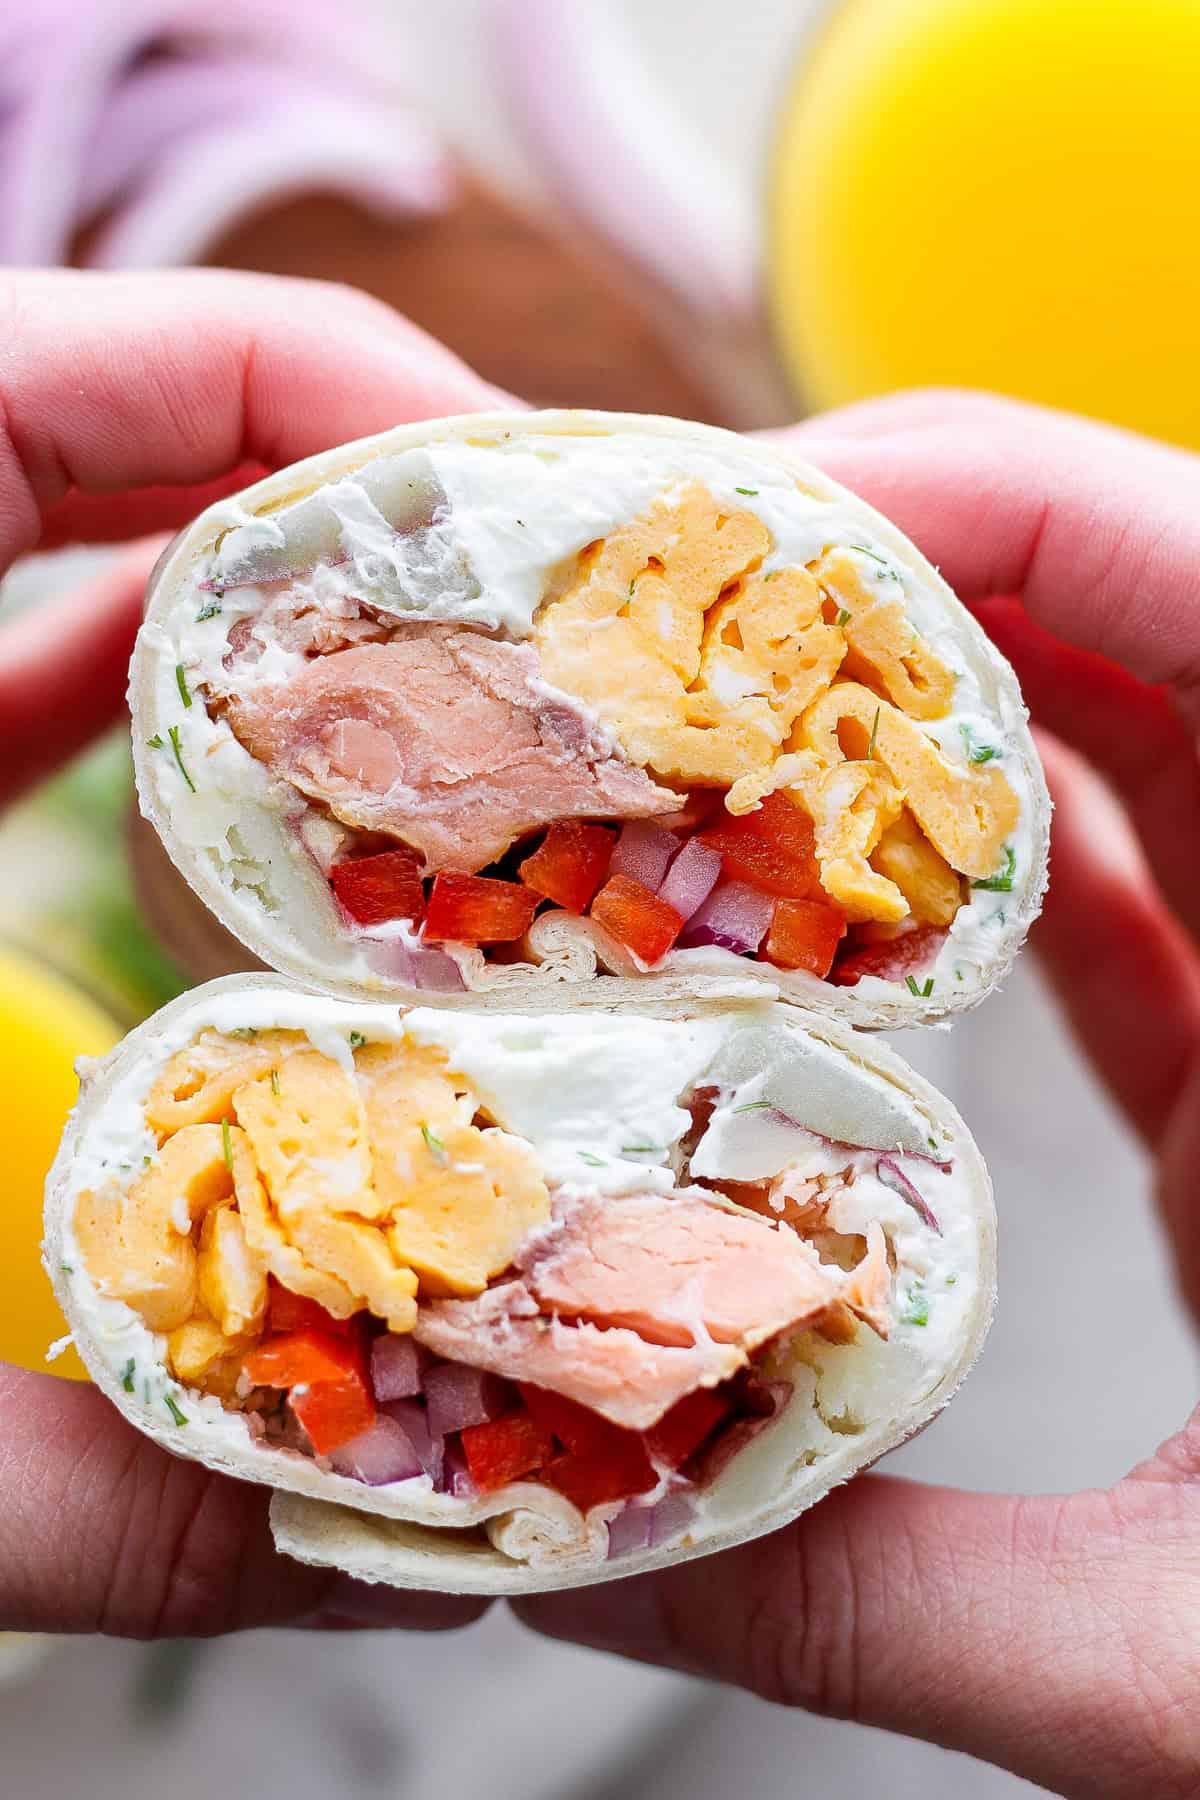 Close-up of a hand ،lding a halved wrap filled with salmon, cream cheese, diced vegetables, and scrambled eggs.